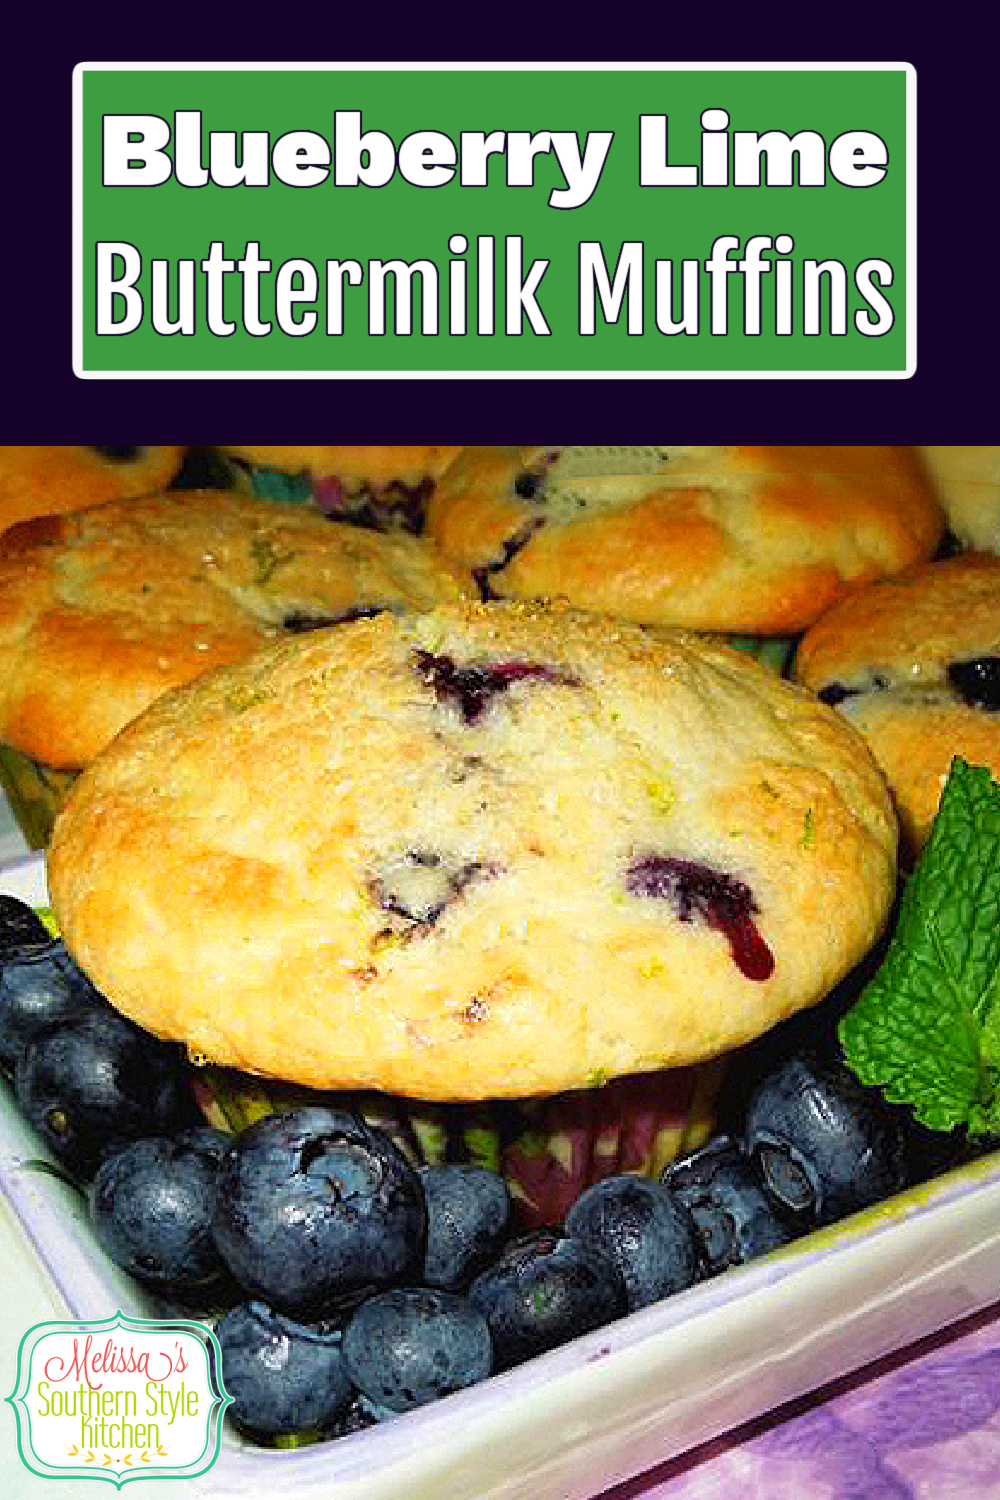 Filled with tangy lime zest and plump fresh berries these Blueberry Lime Buttermilk Muffins are a spectacular way to start your day #blueberrymuffins #lime #blueberrymuffinrecipe #blueberrylimemuffins #brunch #bread #desserts #dessertfoodrecipes #southernfood #southernrecipes #blueberries #buttermilkmuffins